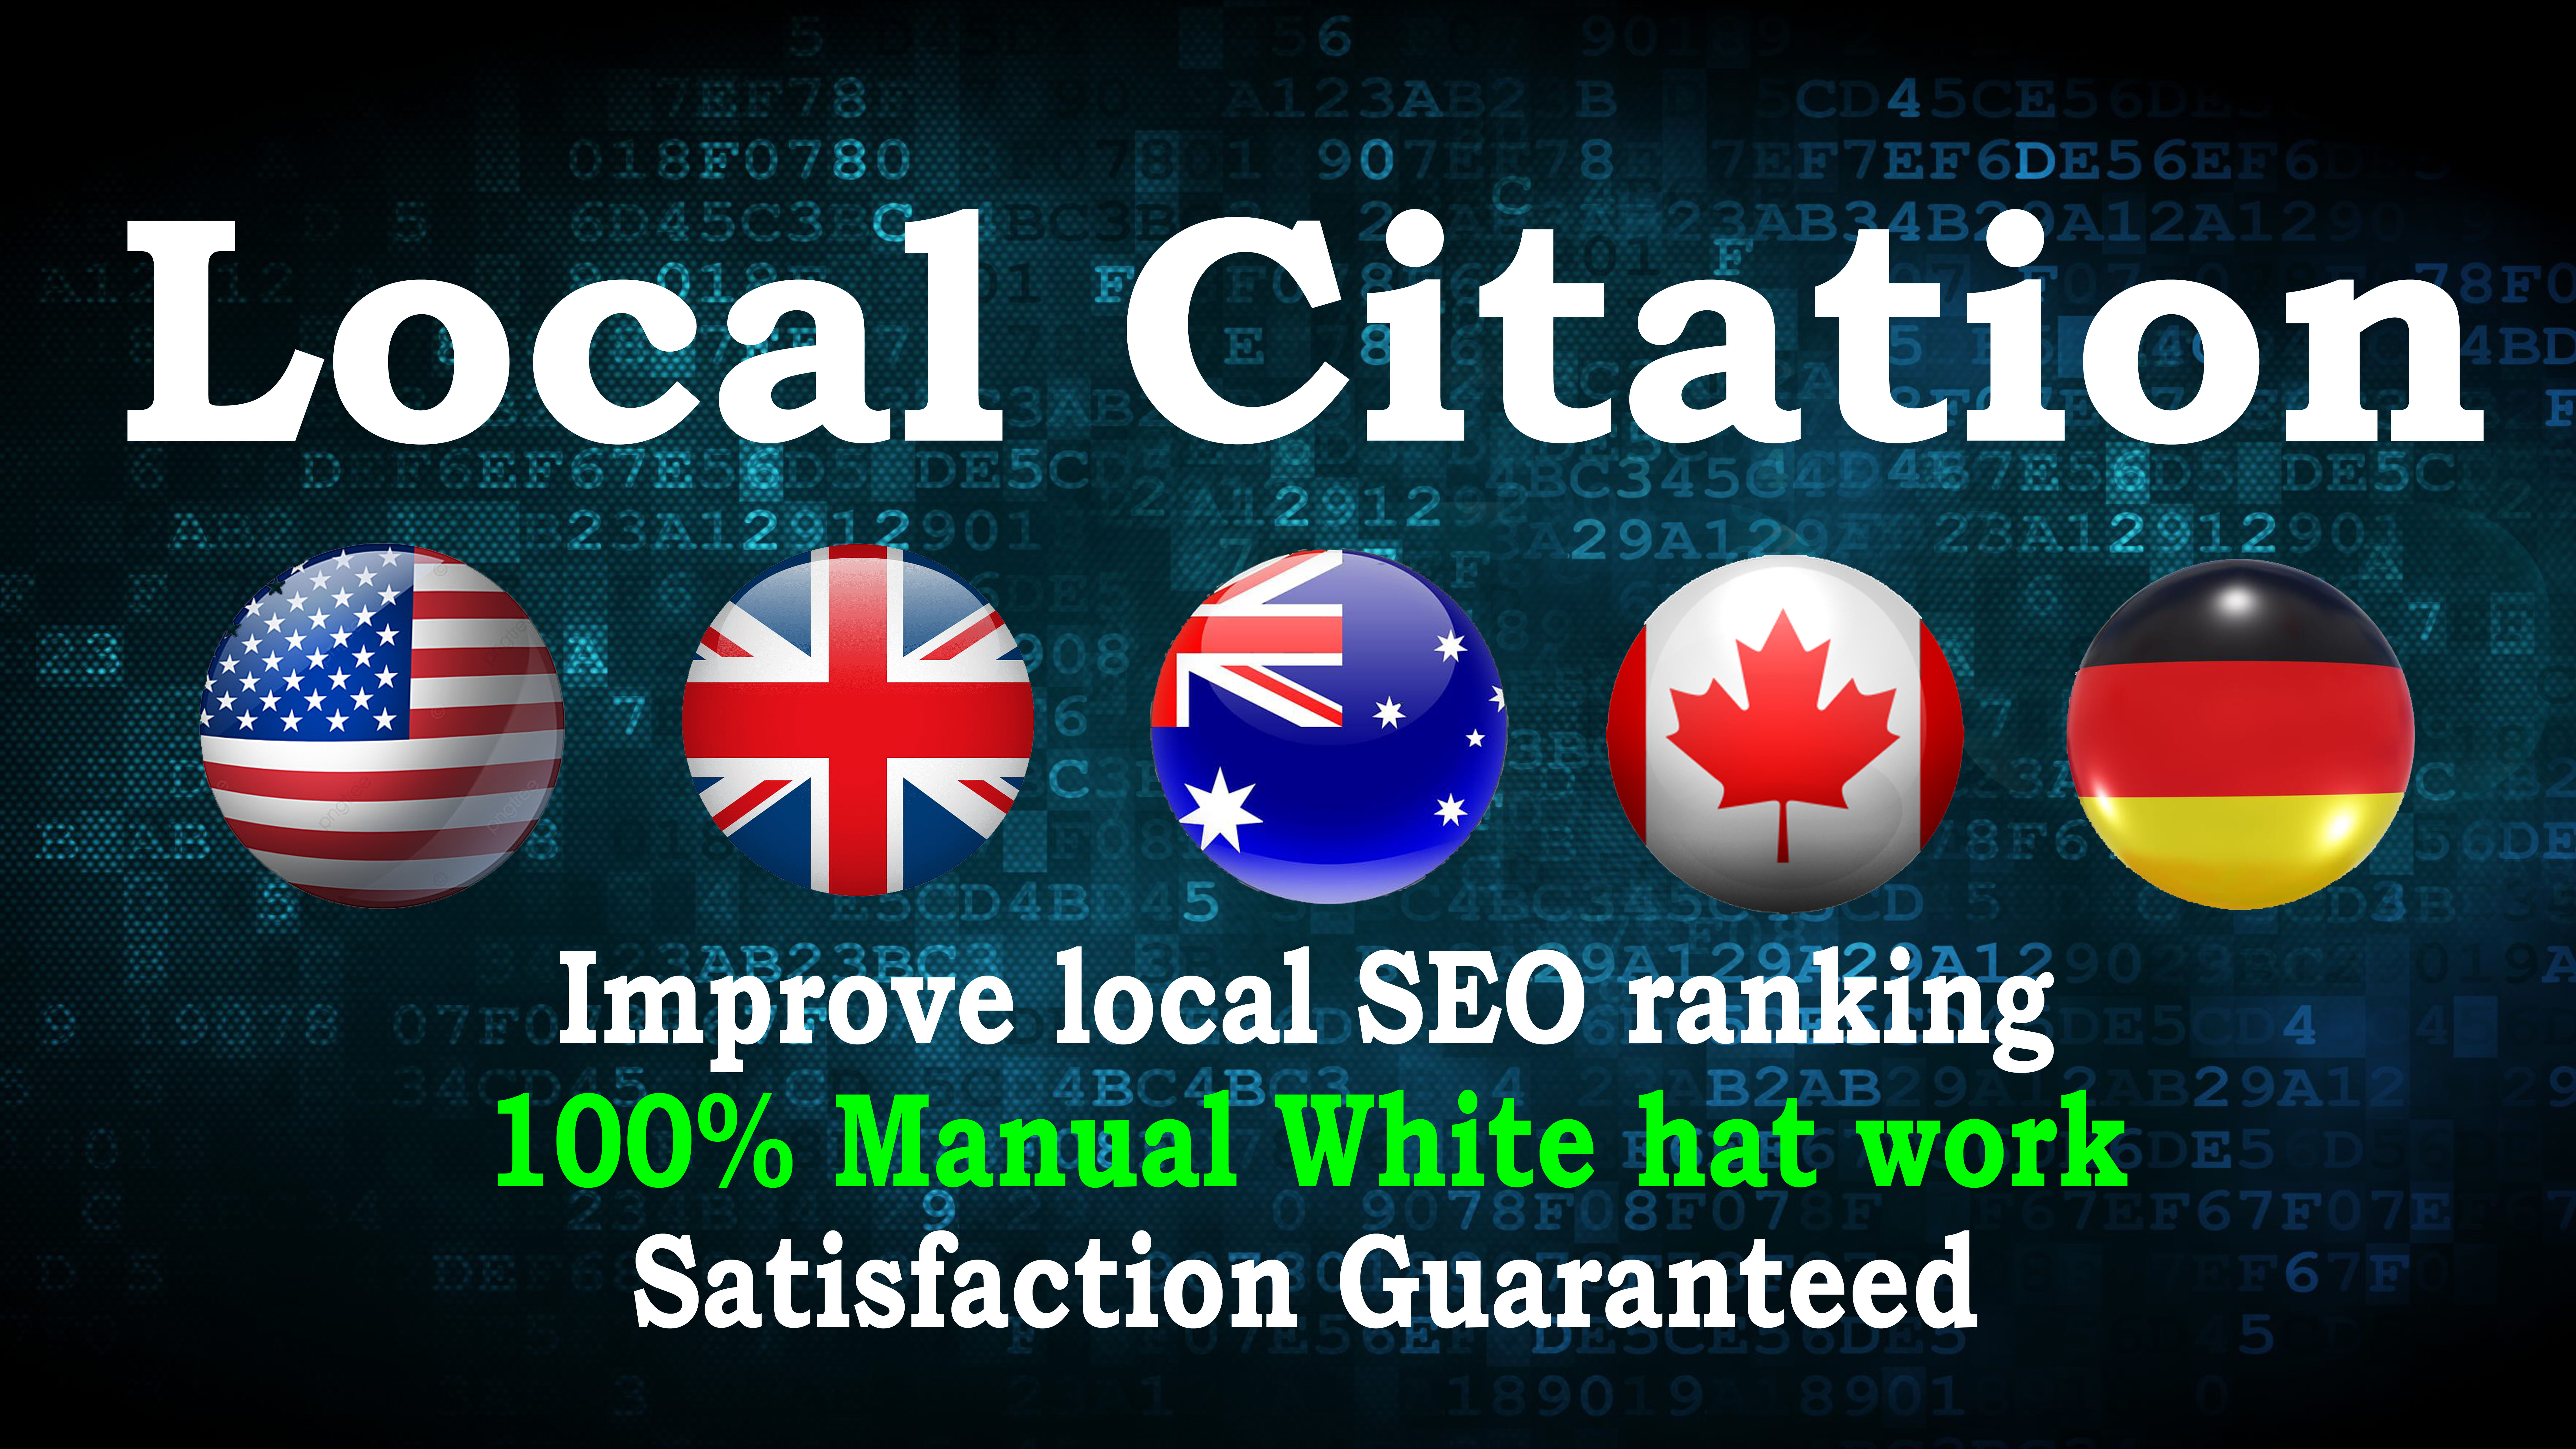 I will build live 200 Local citation, Linkbuilding or Business listing for your website